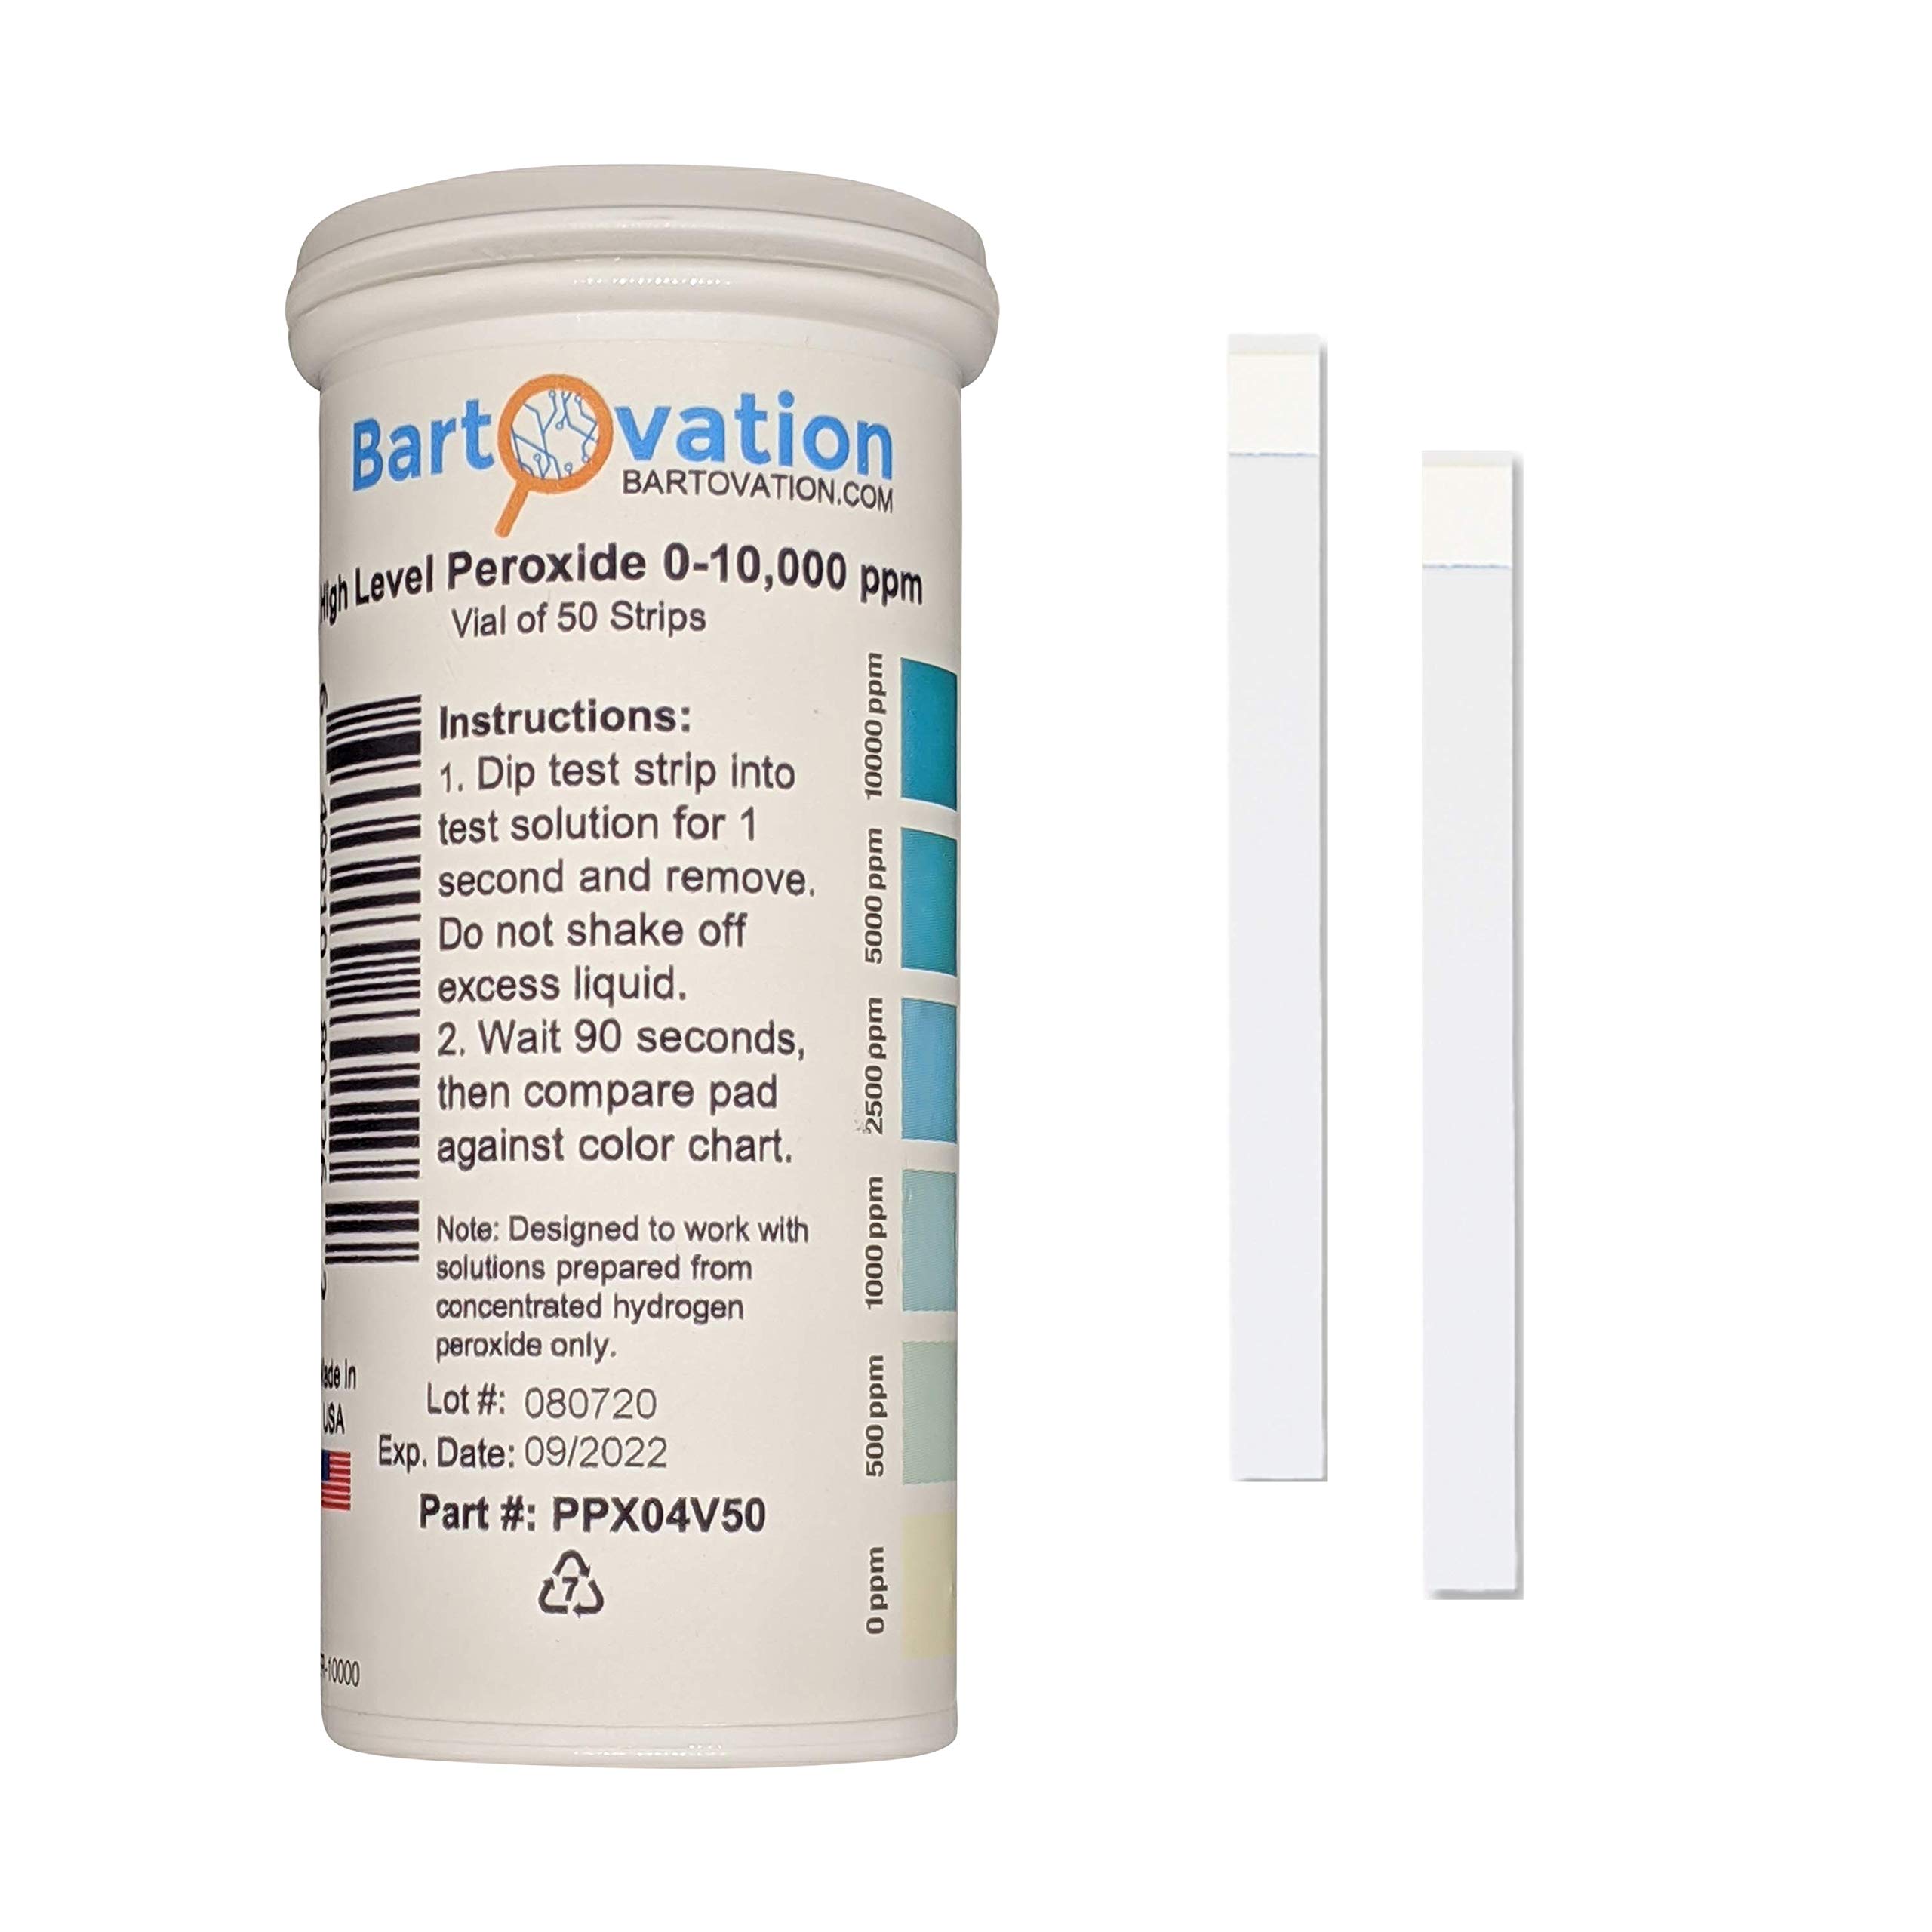 Bartovation Very High Level Hydrogen Peroxide H2O2 Test Strips, 0-10,000 Ppm Vial Of 50 Strips]